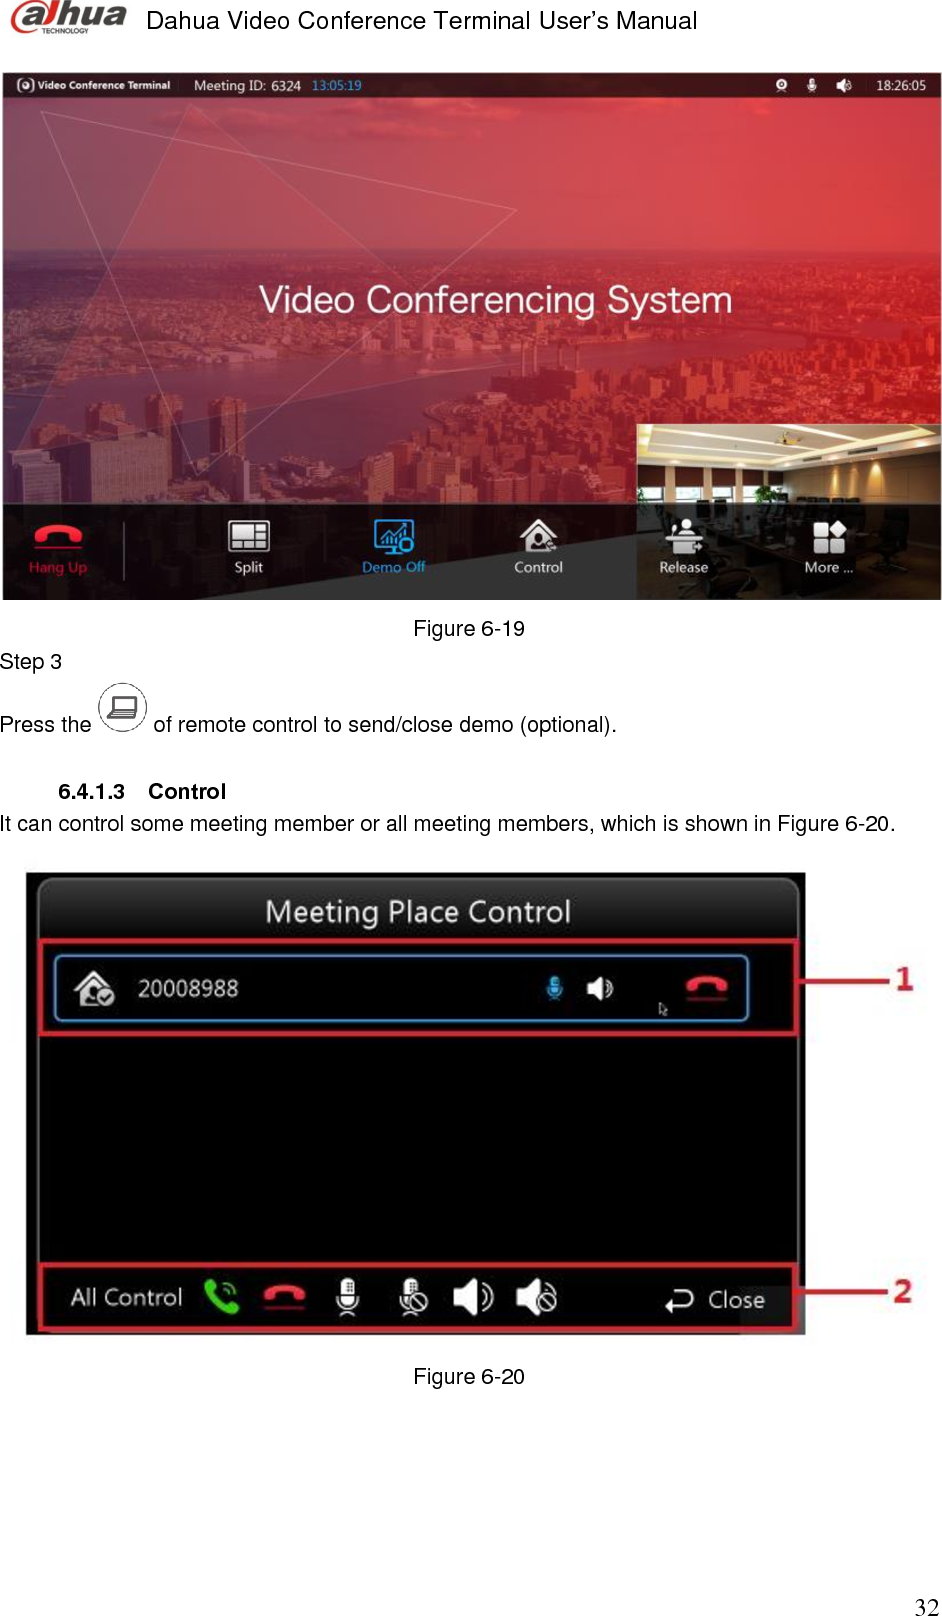  Dahua Video Conference Terminal User’s Manual                                                                              32  Figure 6-19 Step 3  Press the   of remote control to send/close demo (optional).   6.4.1.3  Control It can control some meeting member or all meeting members, which is shown in Figure 6-20.   Figure 6-20      